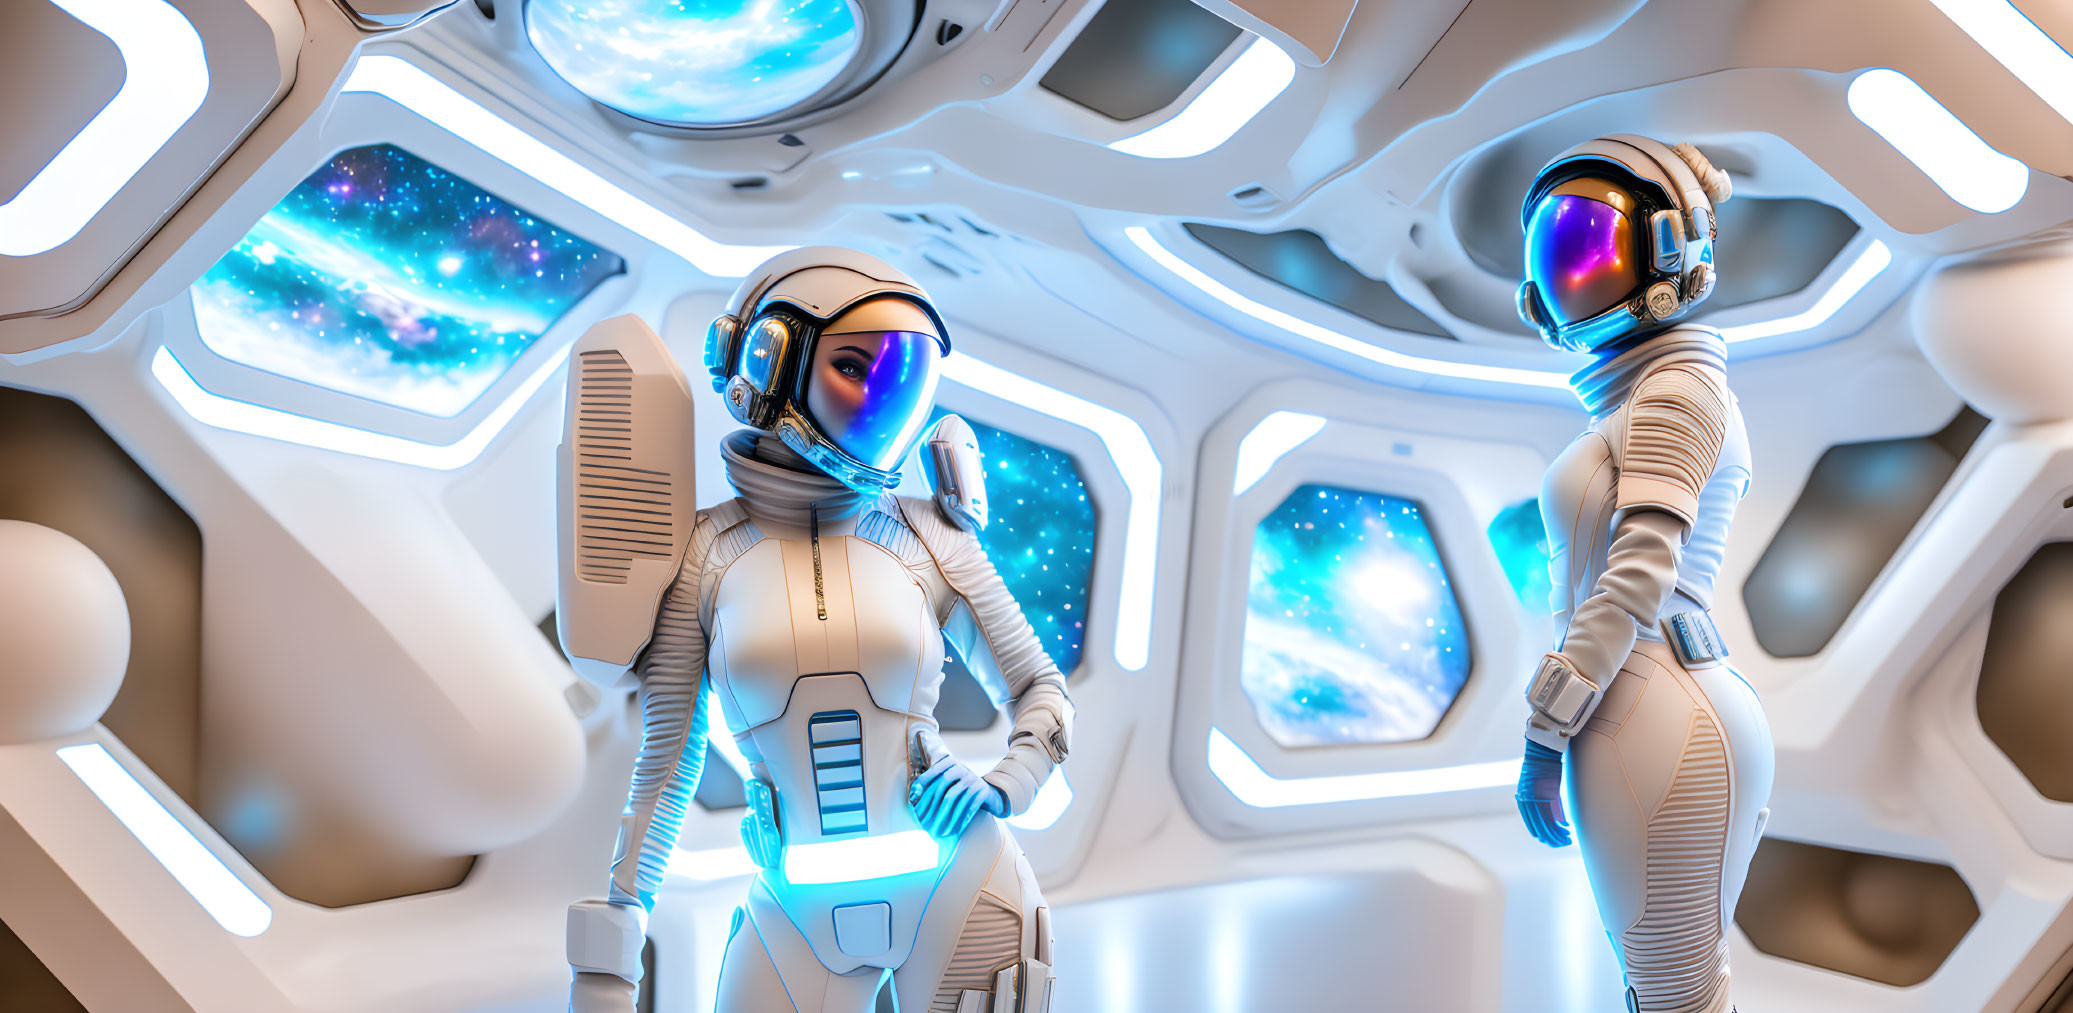 Futuristic spacecraft interior with astronauts and starry cosmos view